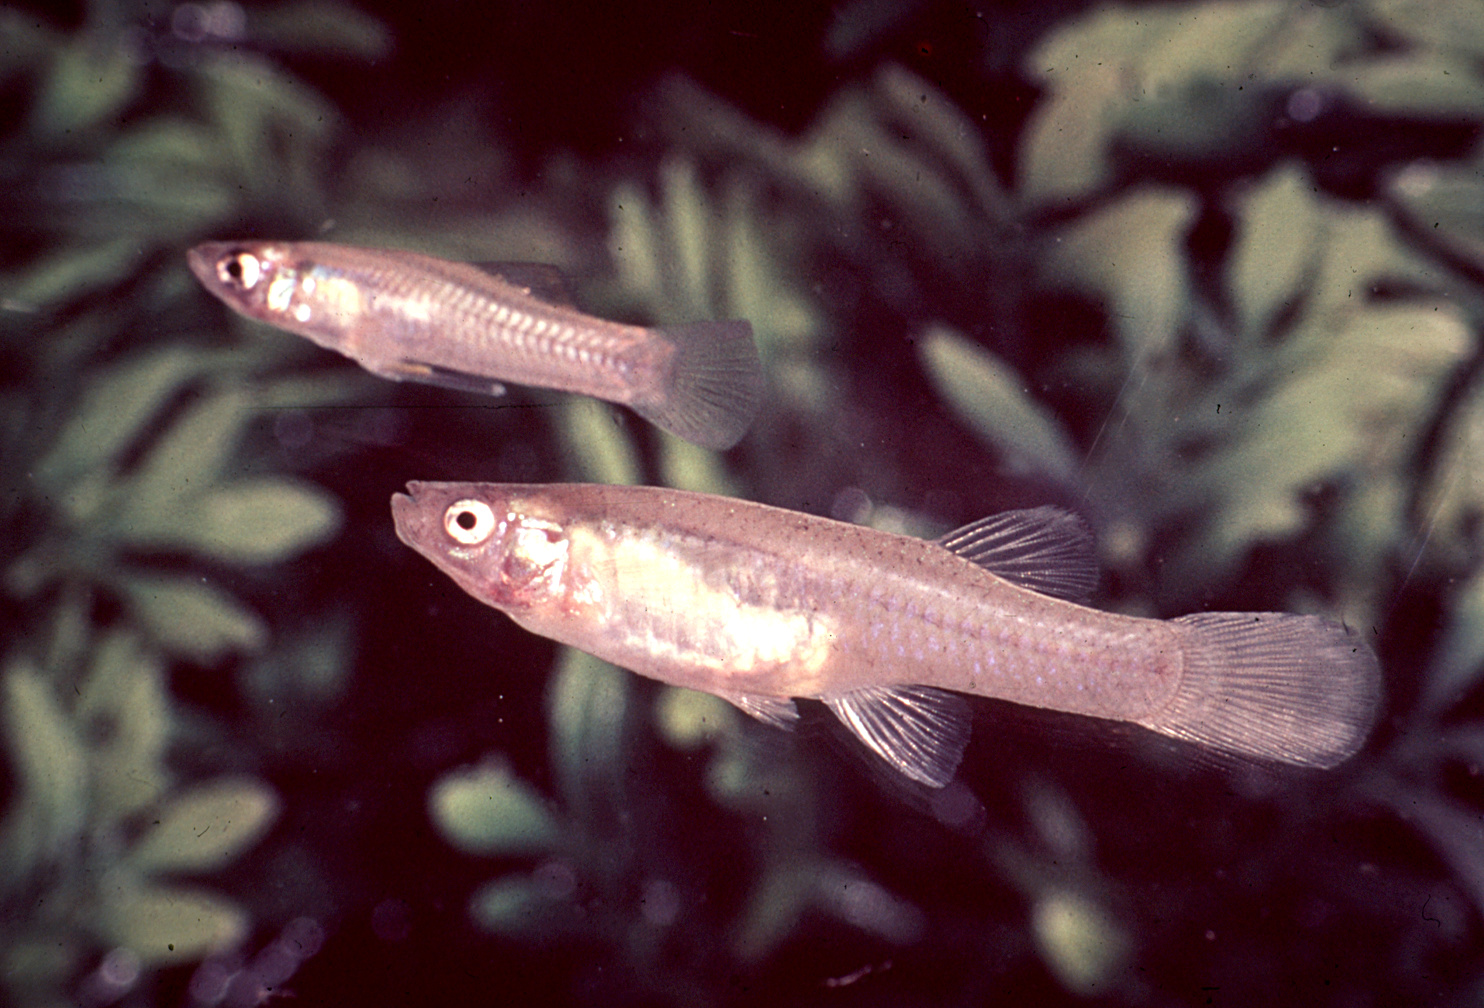 A grainy photo of two fish, each about 2-inches long, nestled among underwater greenery. They have orange and pink scales, not unlike some goldfish. This species was recently declared extinct, decades after the last sighting.